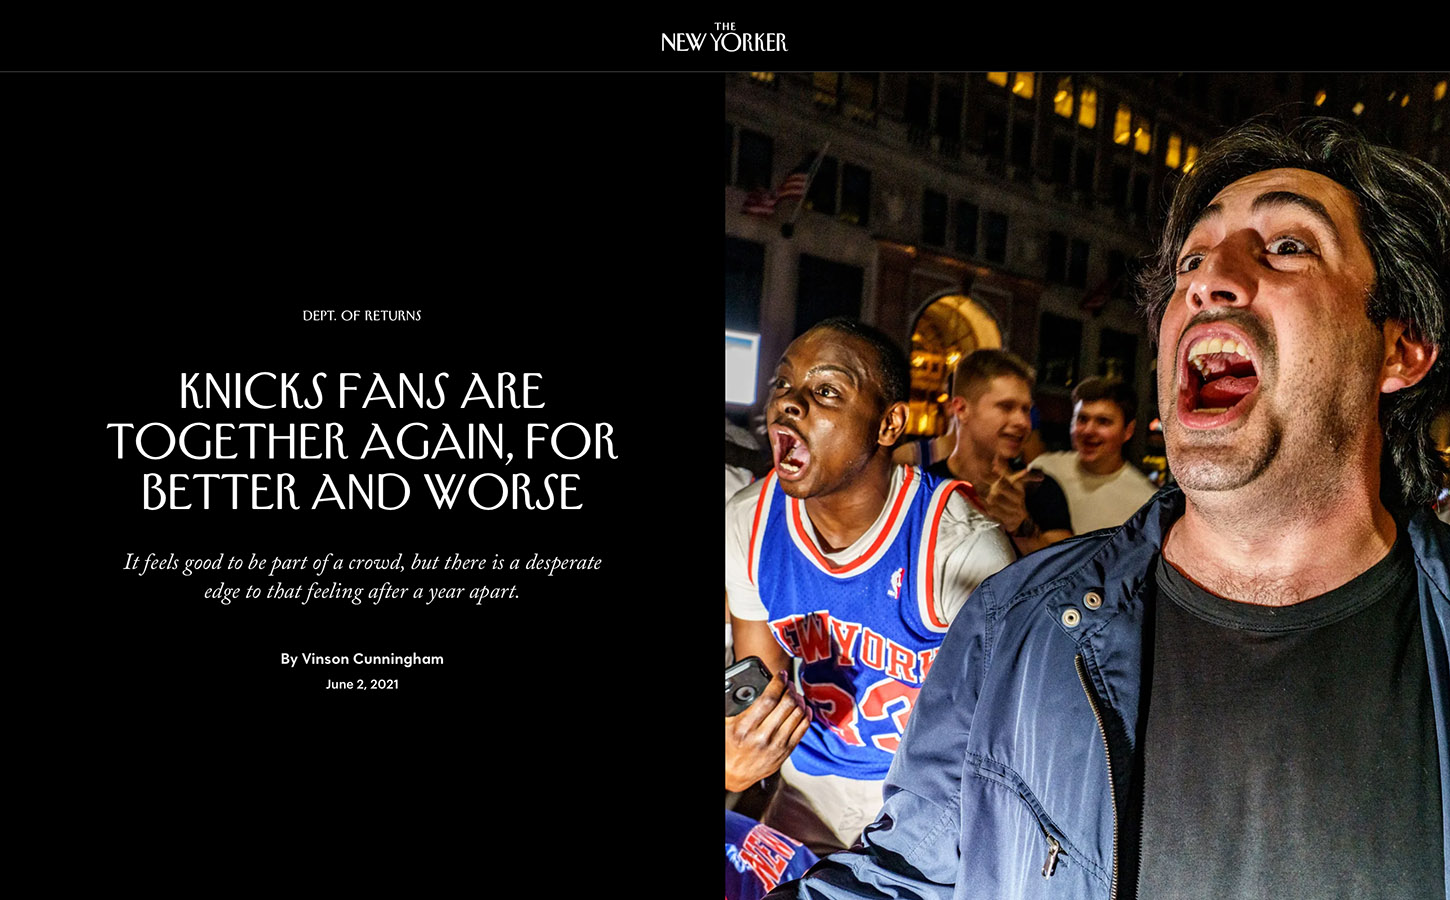 "Knicks Fans Are Together Again, for Better and Worse," photograph by Mark Peterson, June 2 at newyorker.com